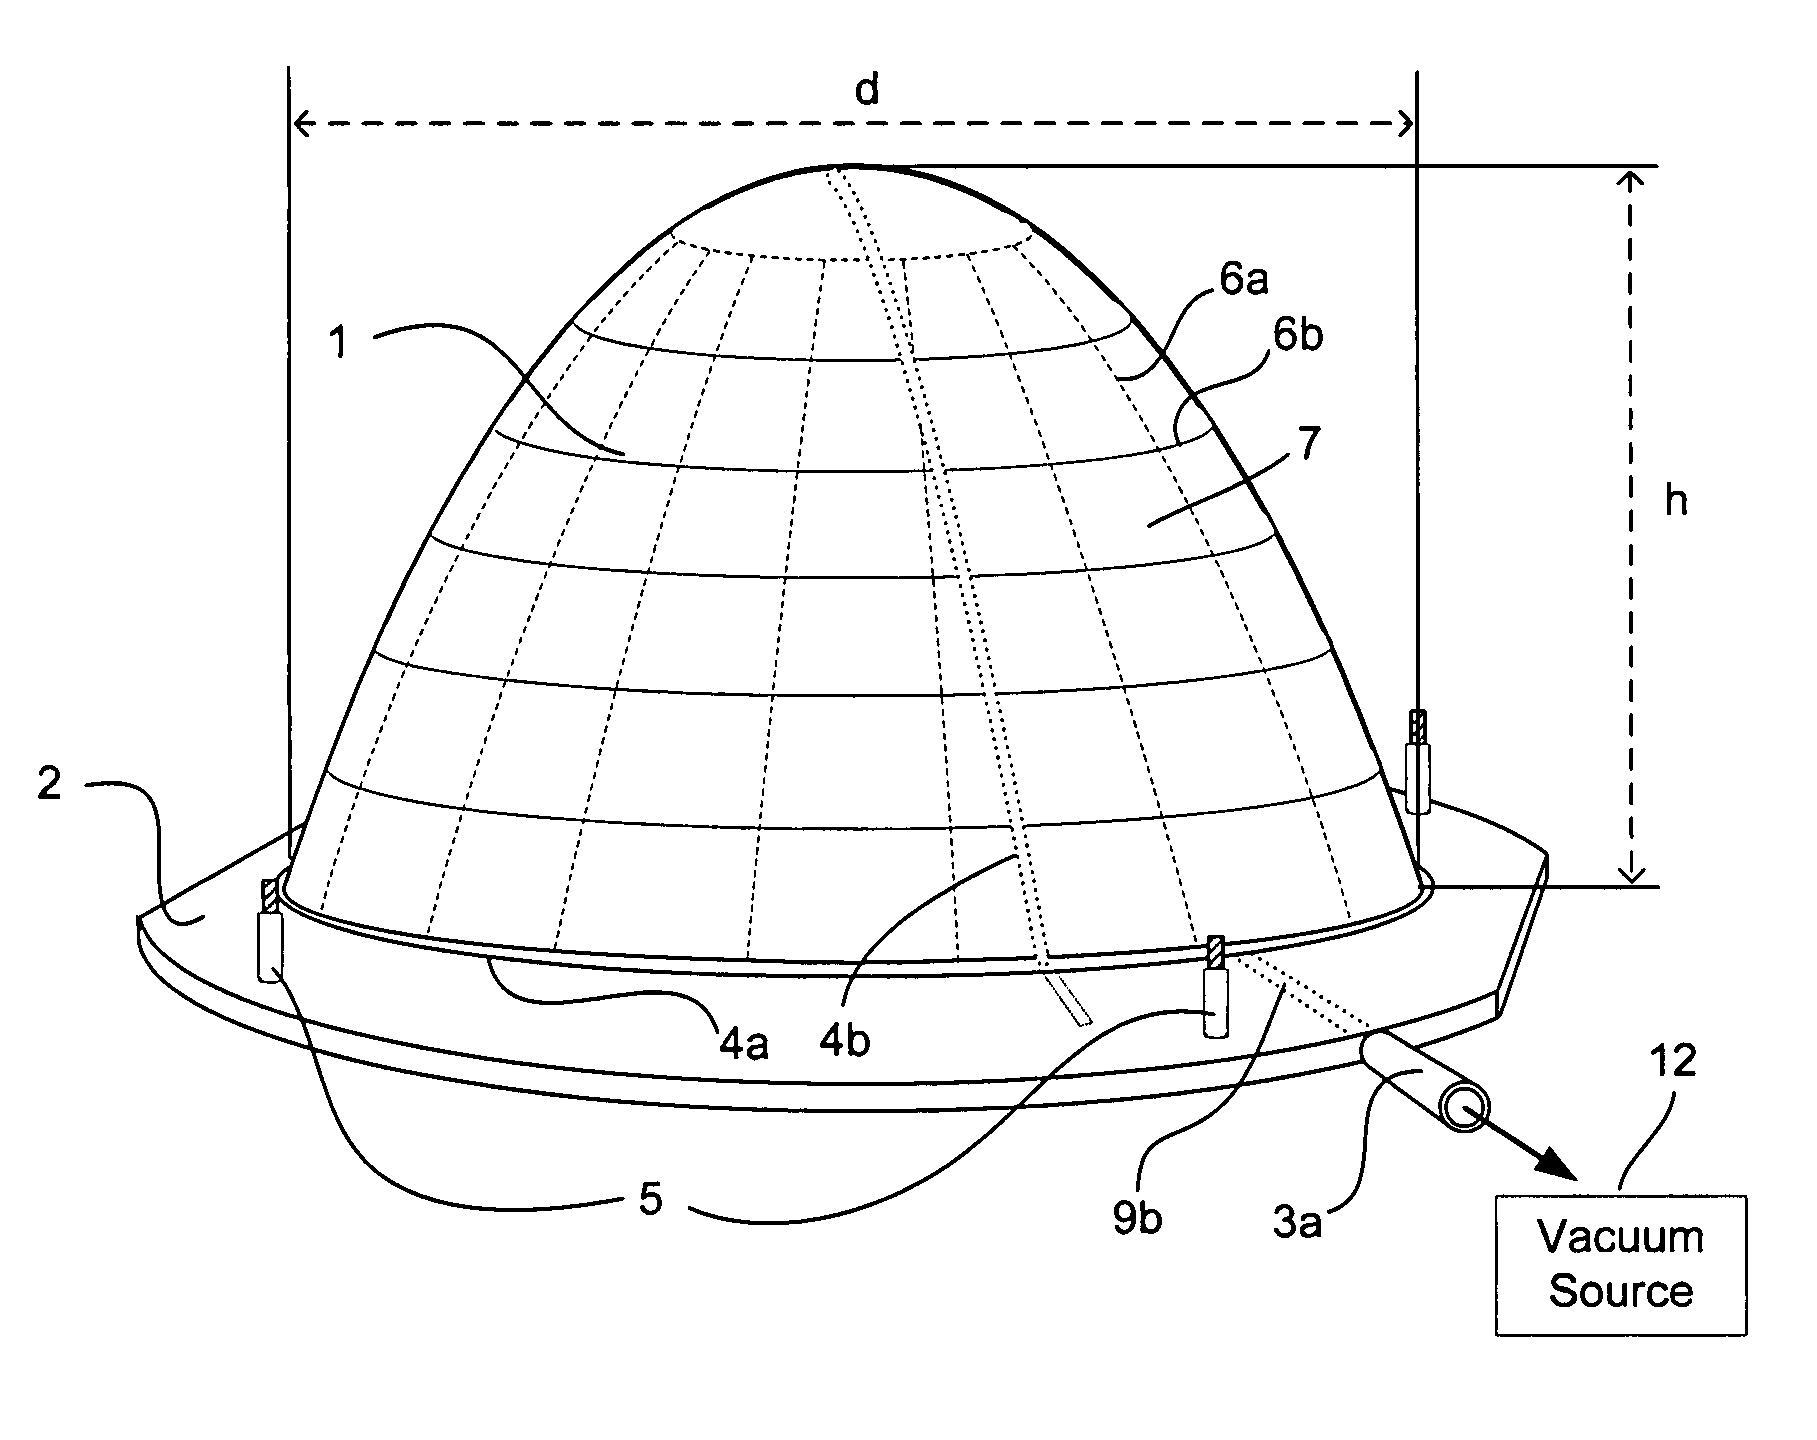 Method and device for immobilization of the human breast in a prone position for radiotherapy